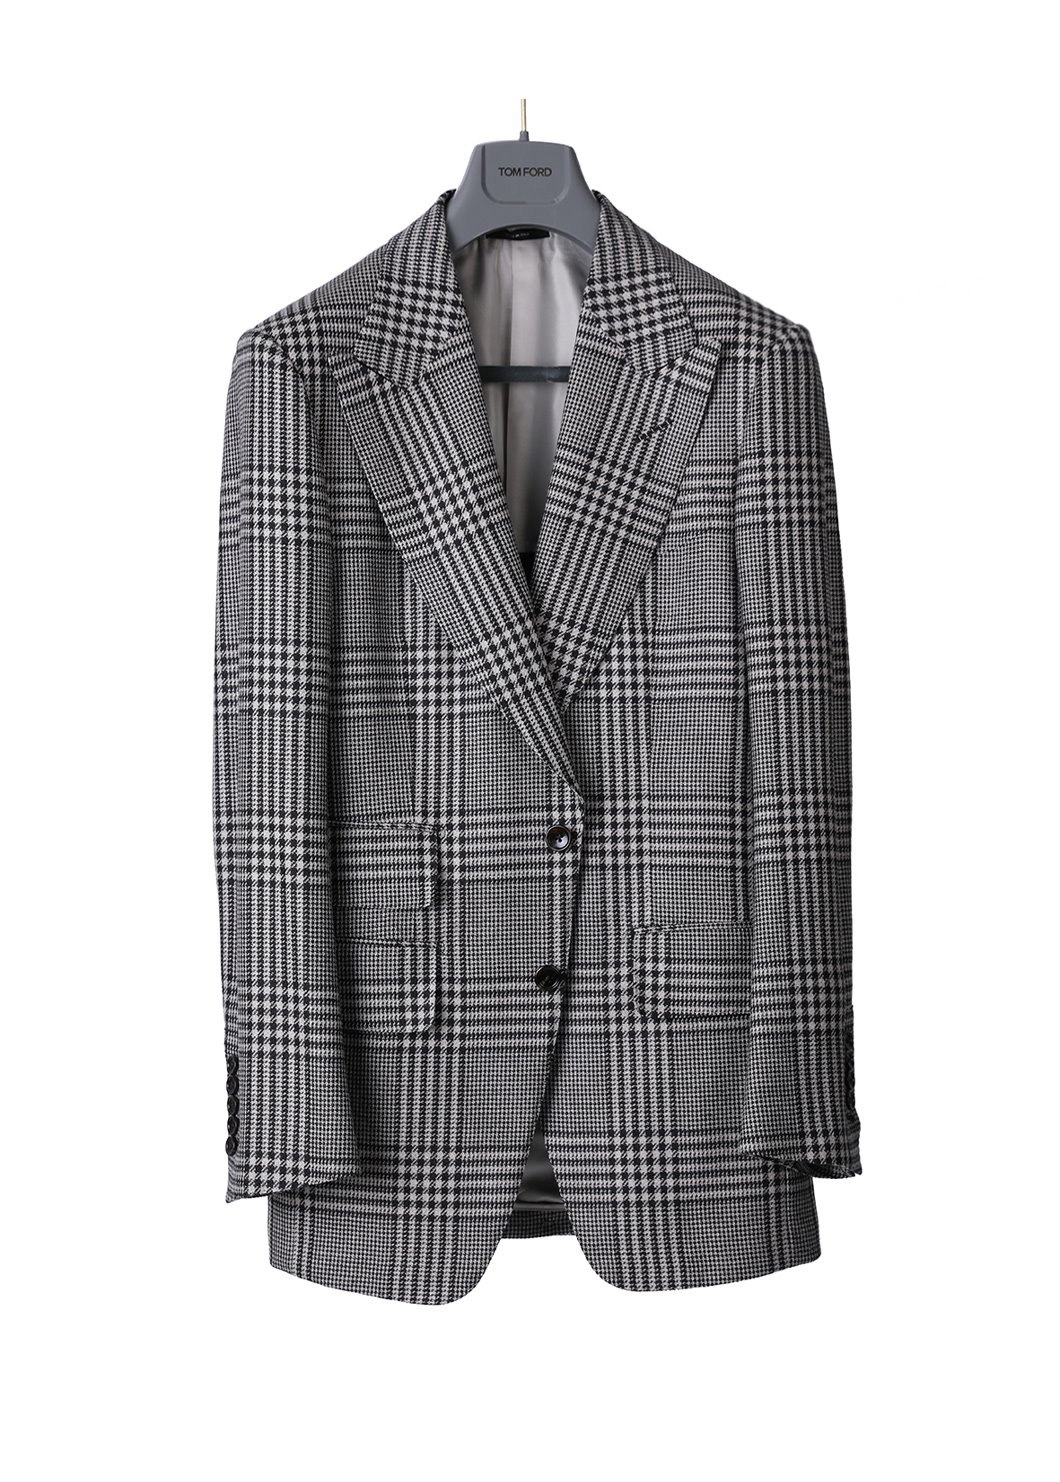 TOMFORD Atticus Gray HoundTooth Check Suit